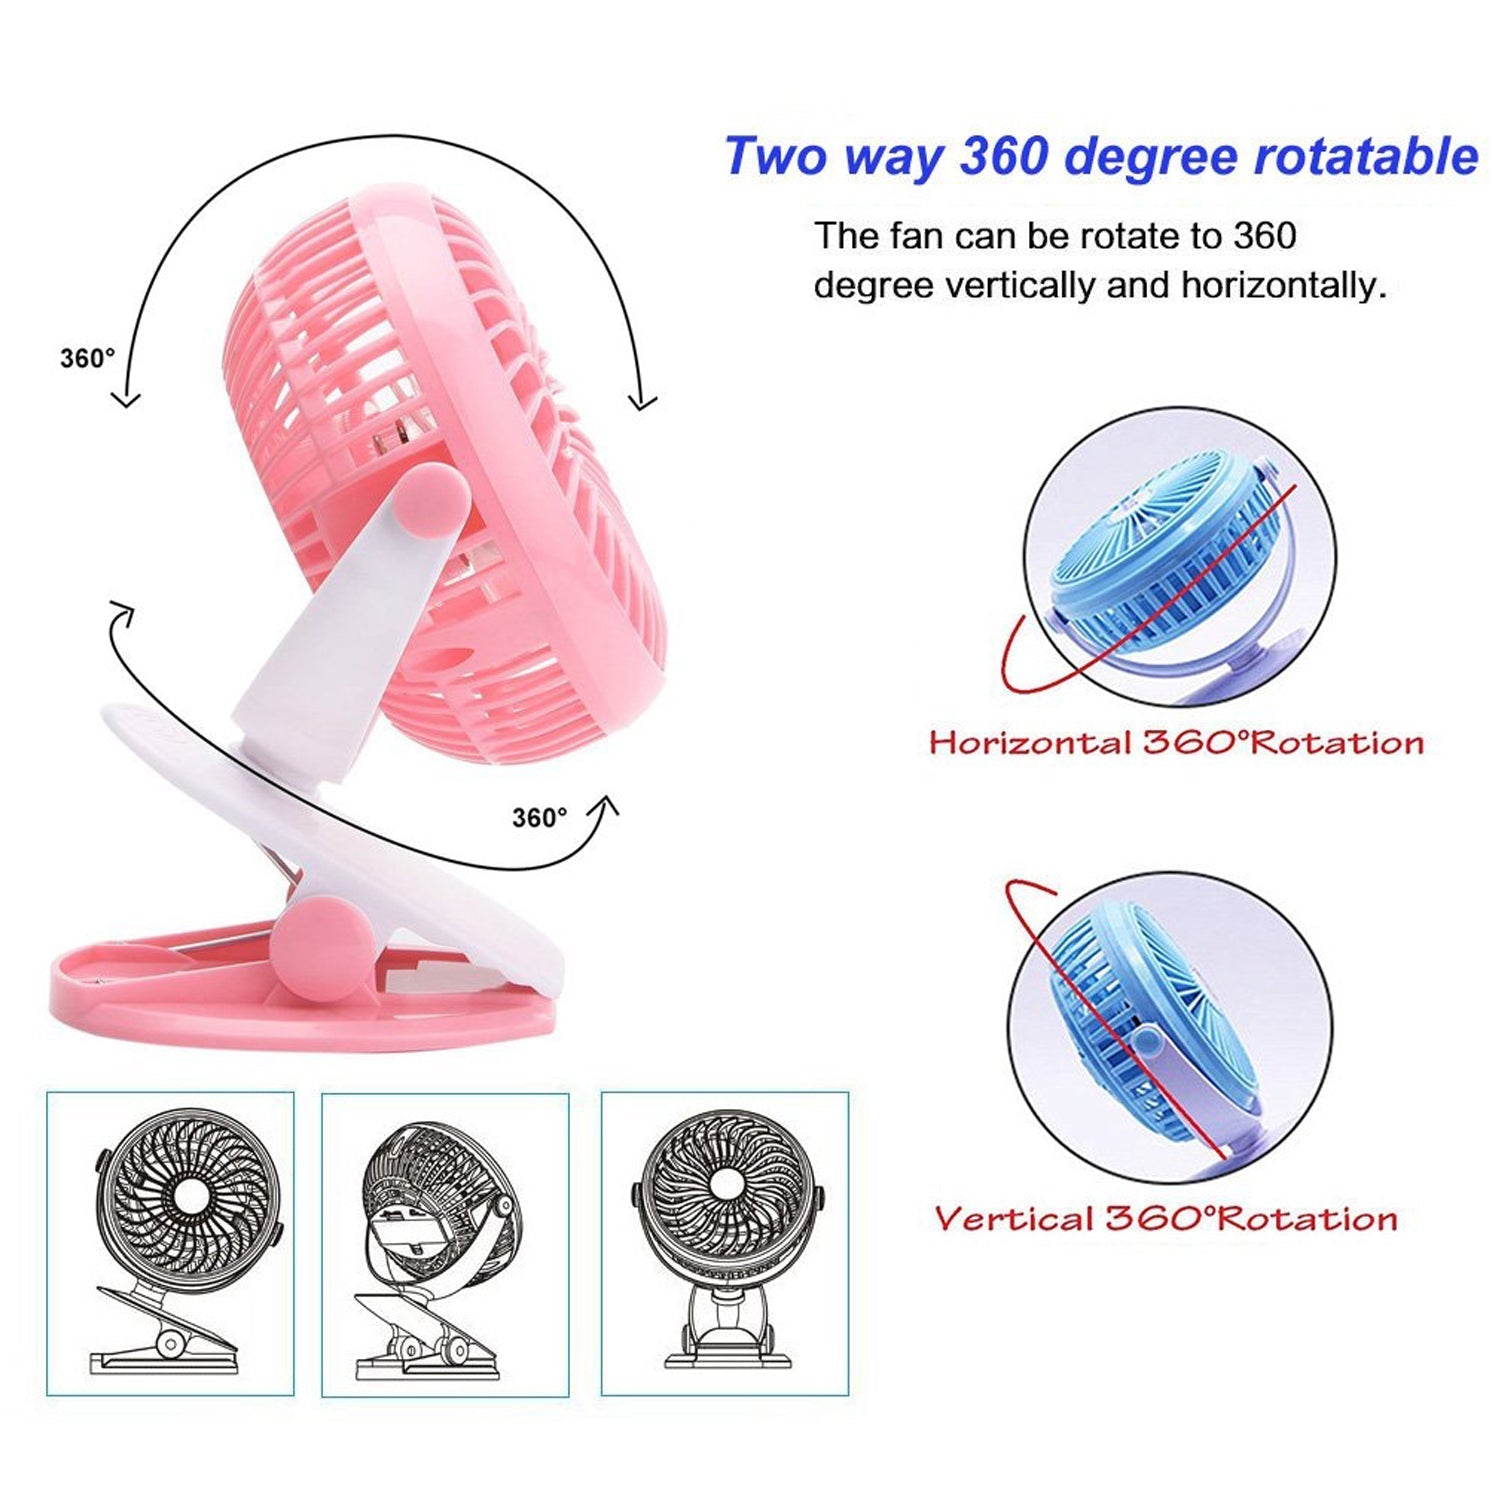 4824 Mini USB Clip Fan widely used in summers for cool down rooms and body purposes. DeoDap